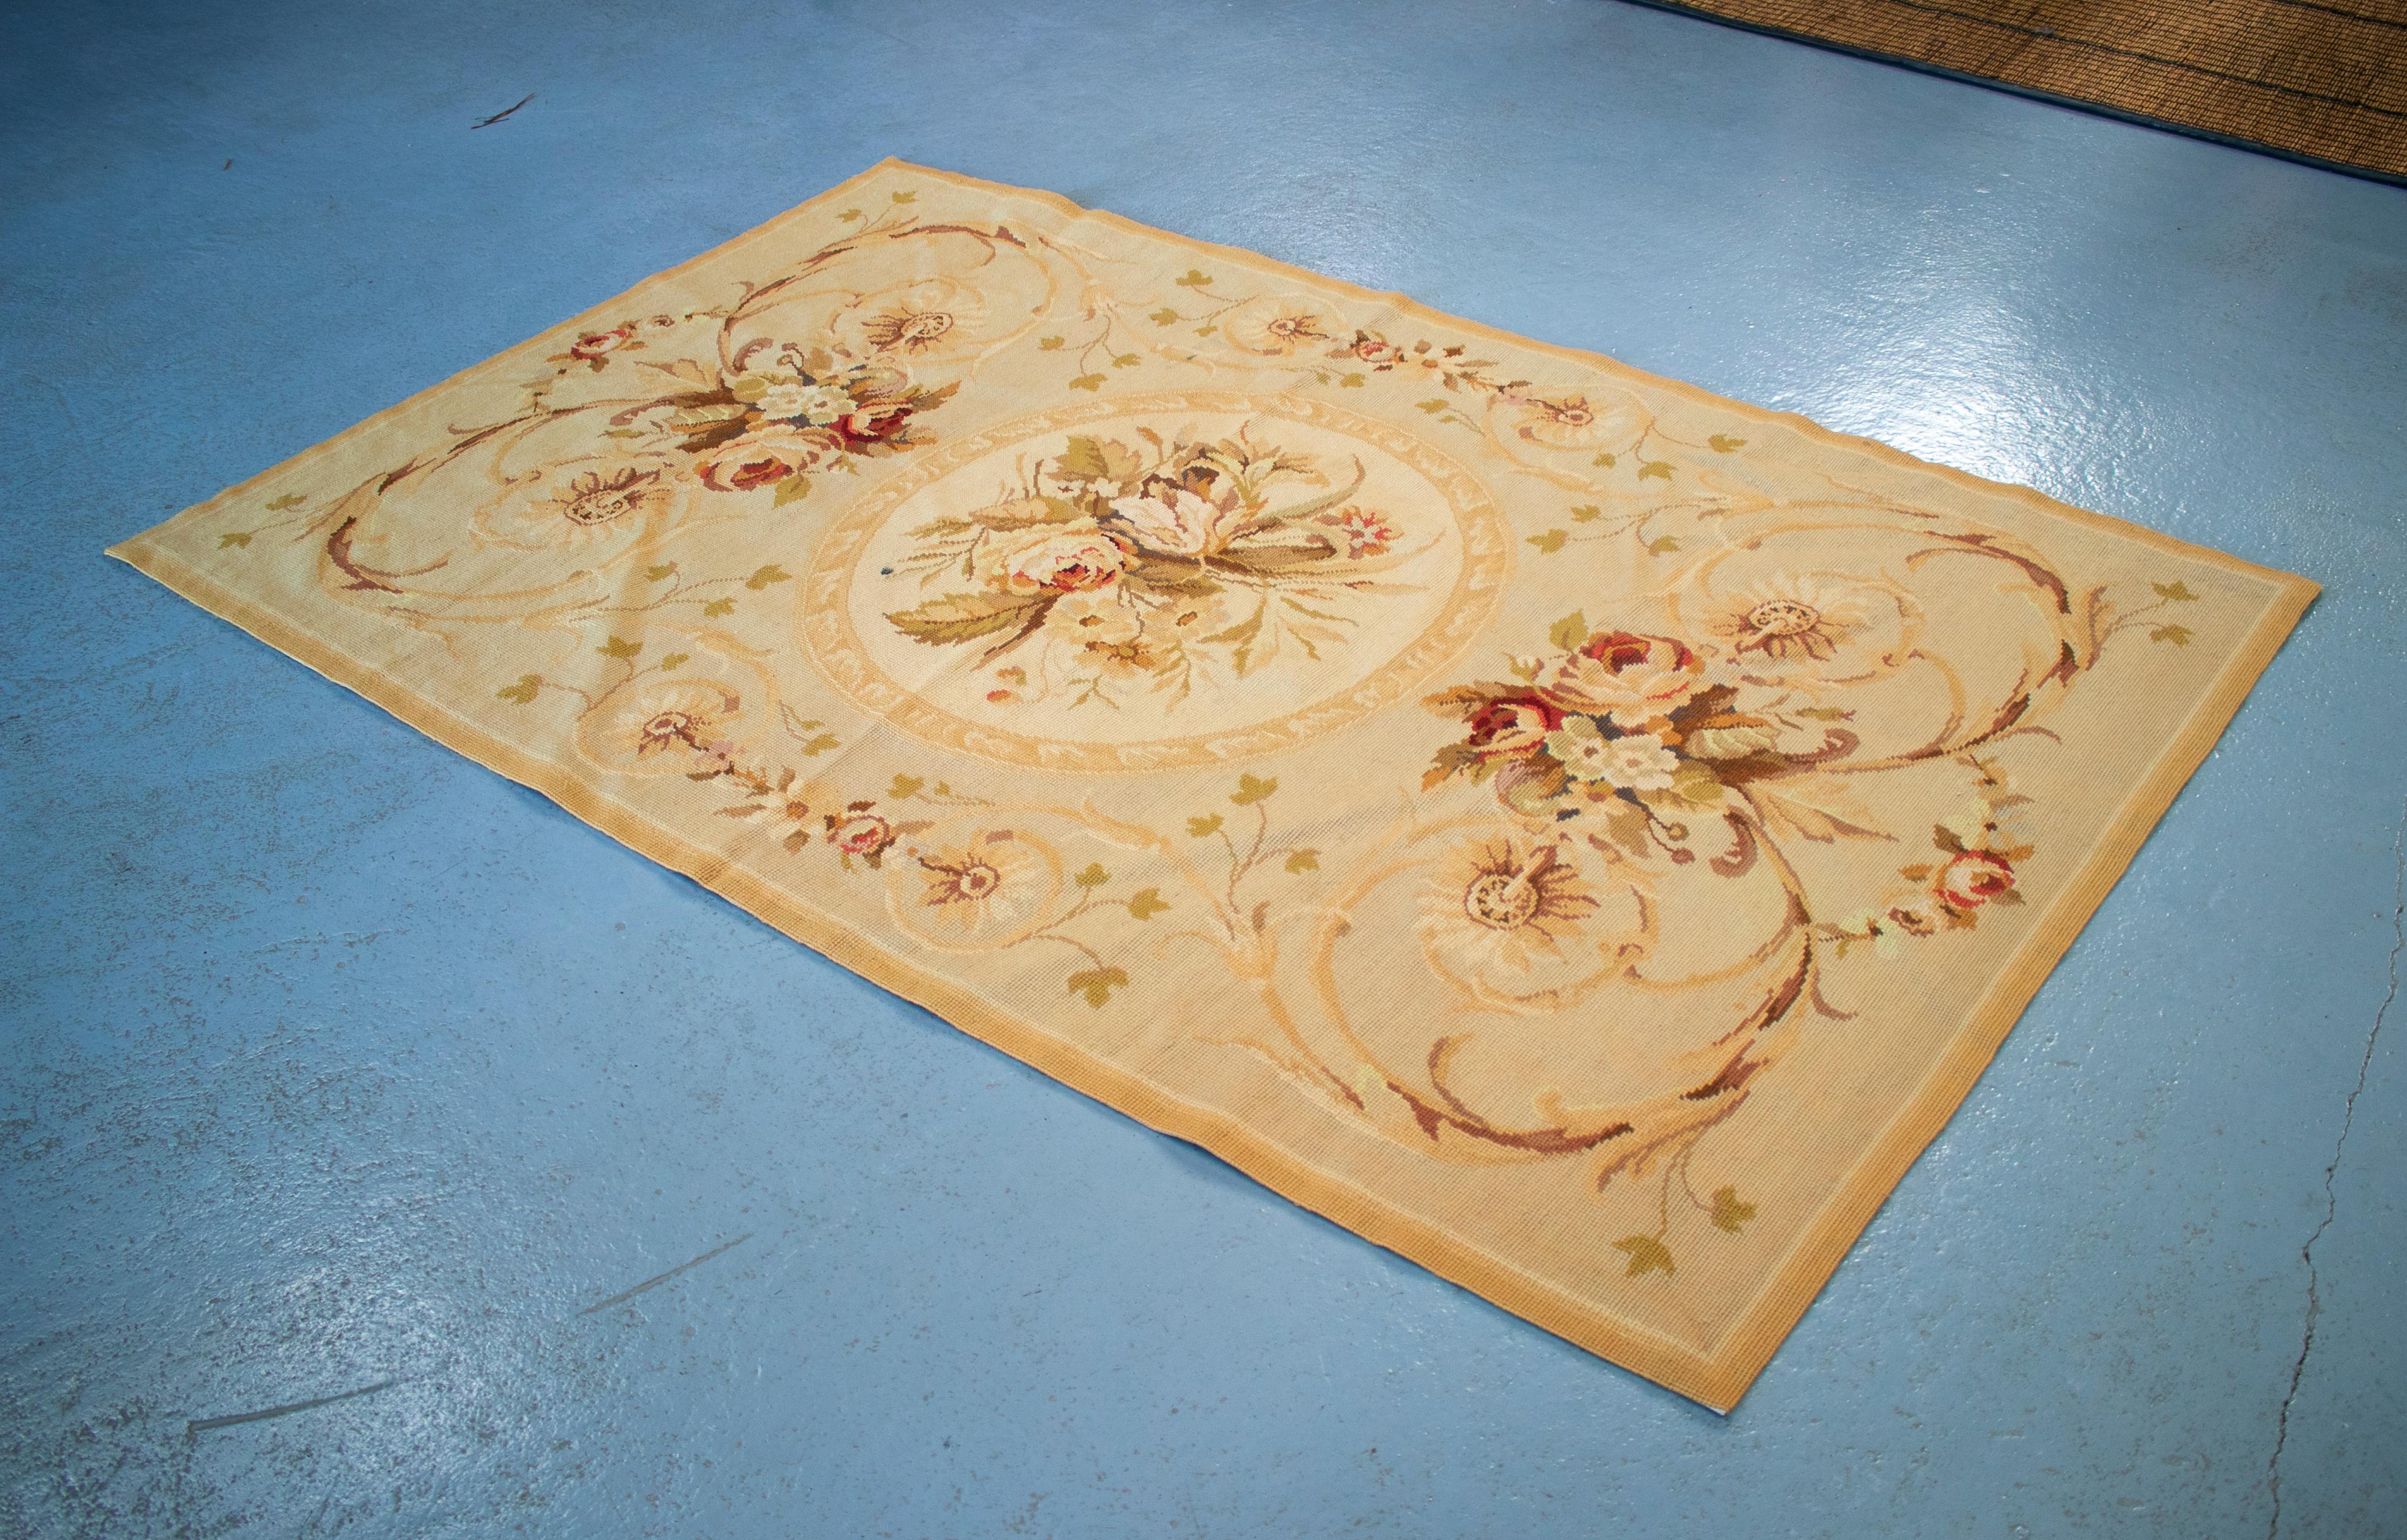 1950s French carpet with ochre tones and flower decorations.